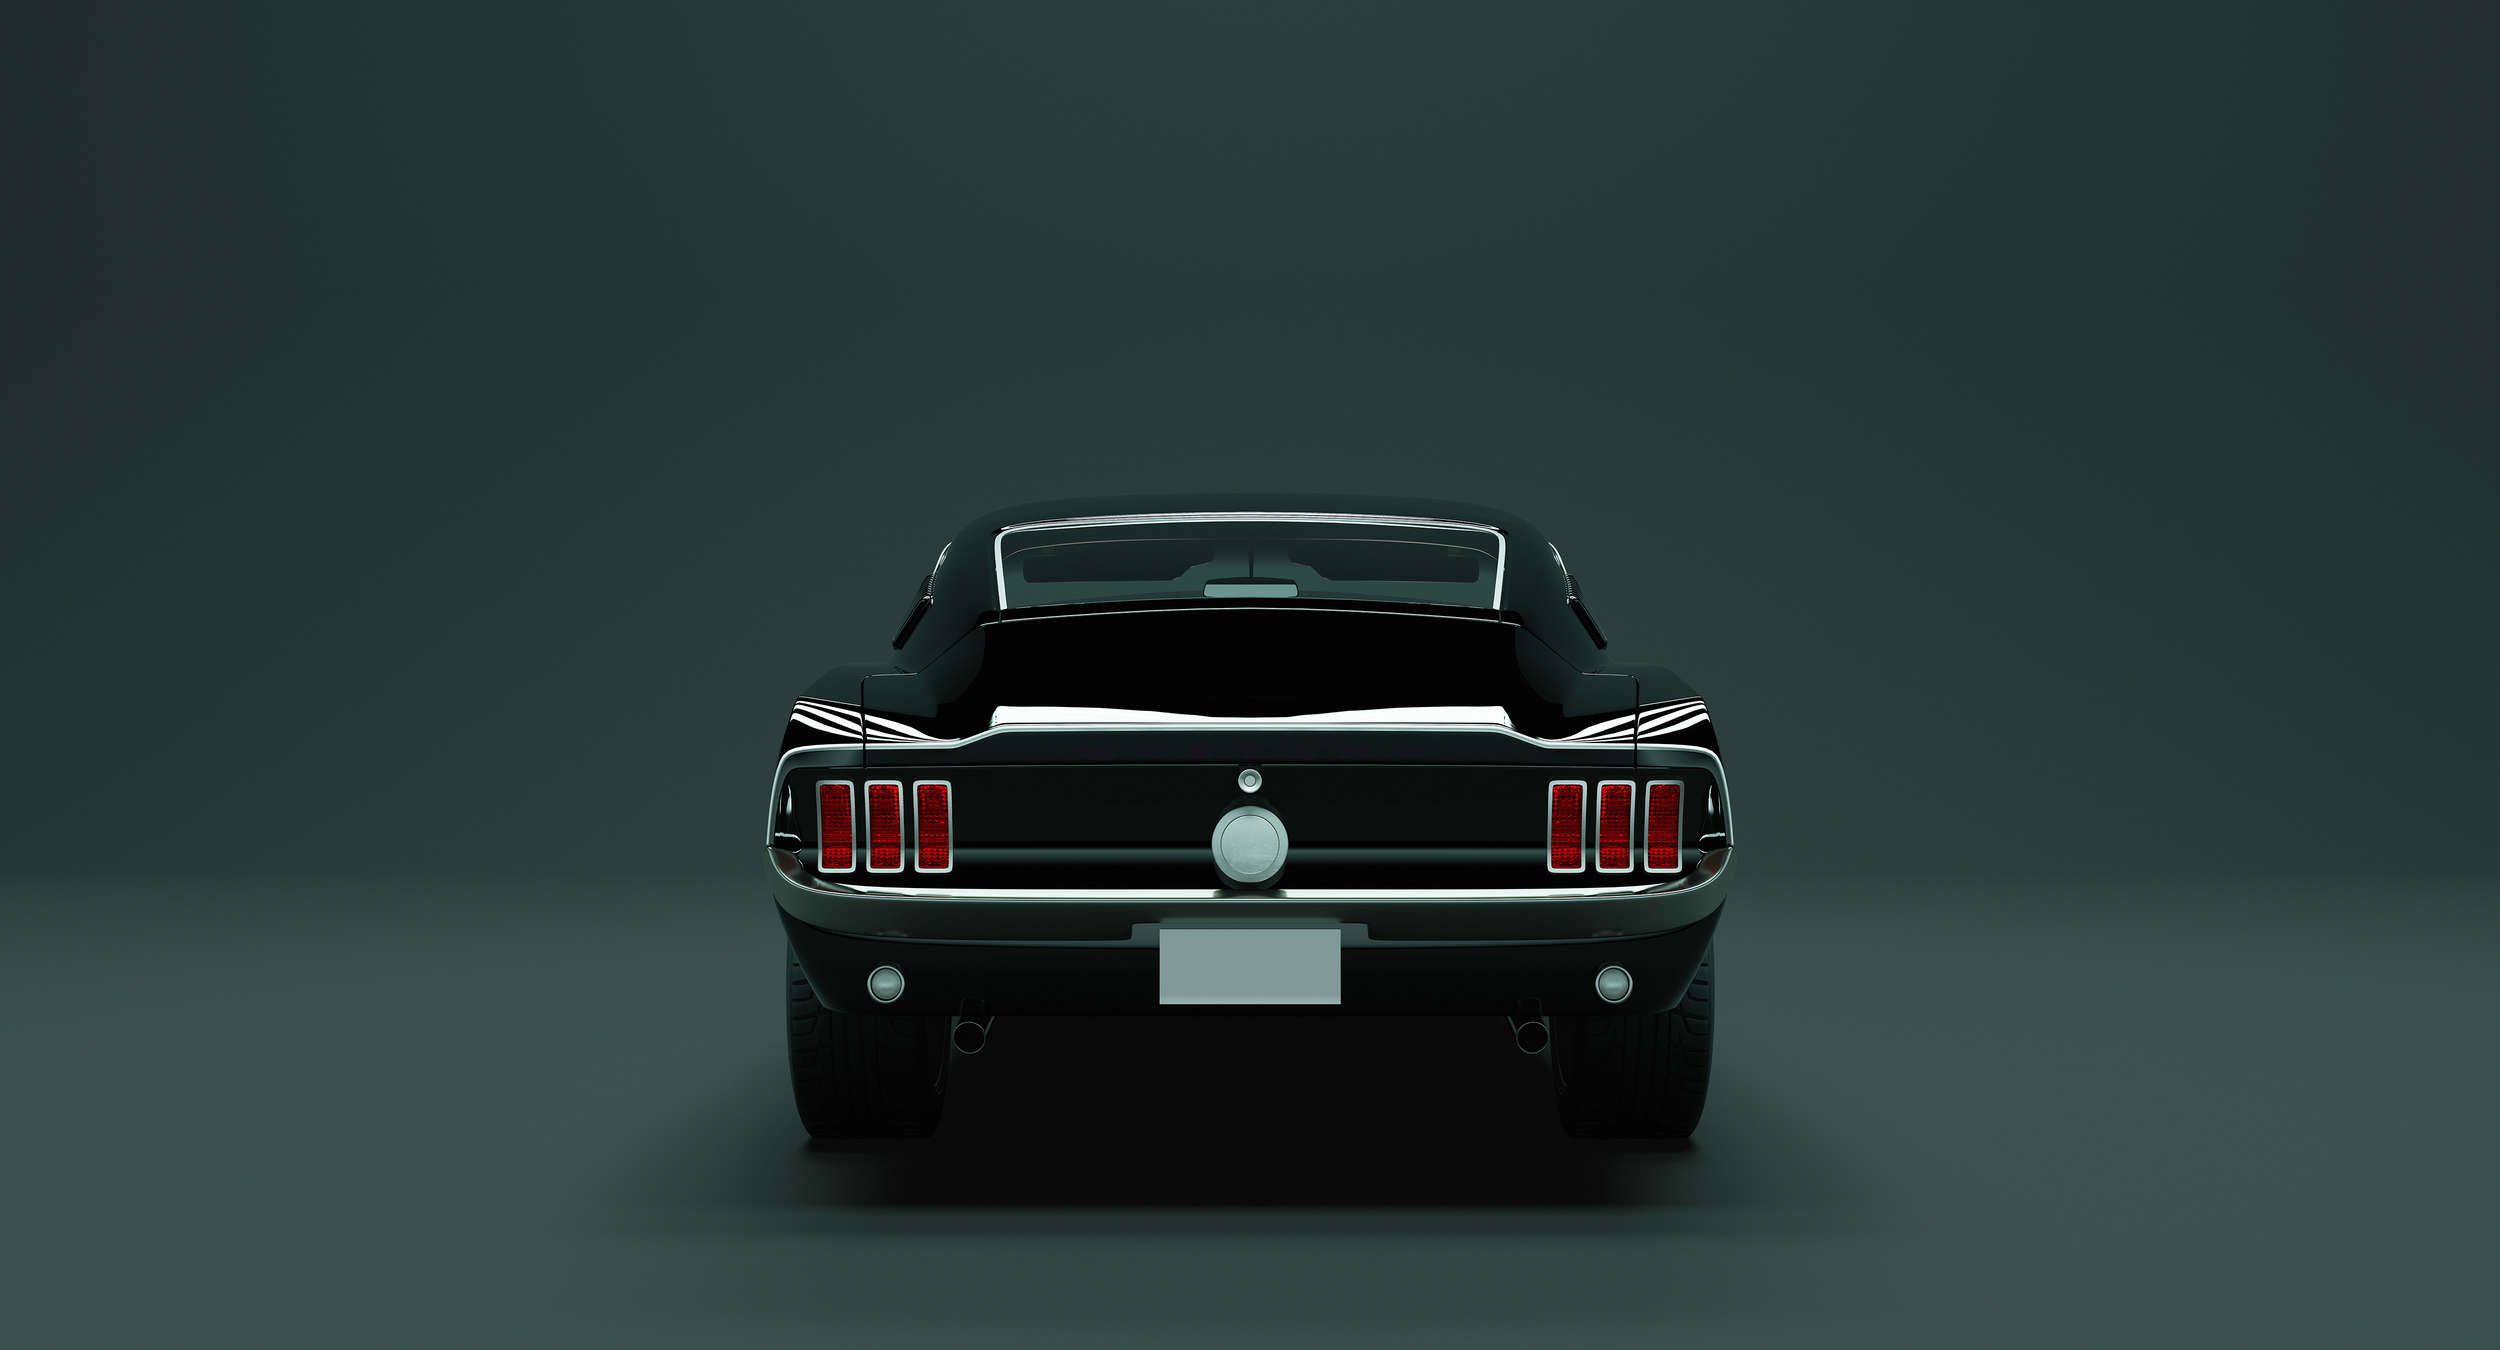             Mustang 3 - American Muscle Car Wallpaper - Blue, Black | Premium Smooth Non-woven
        